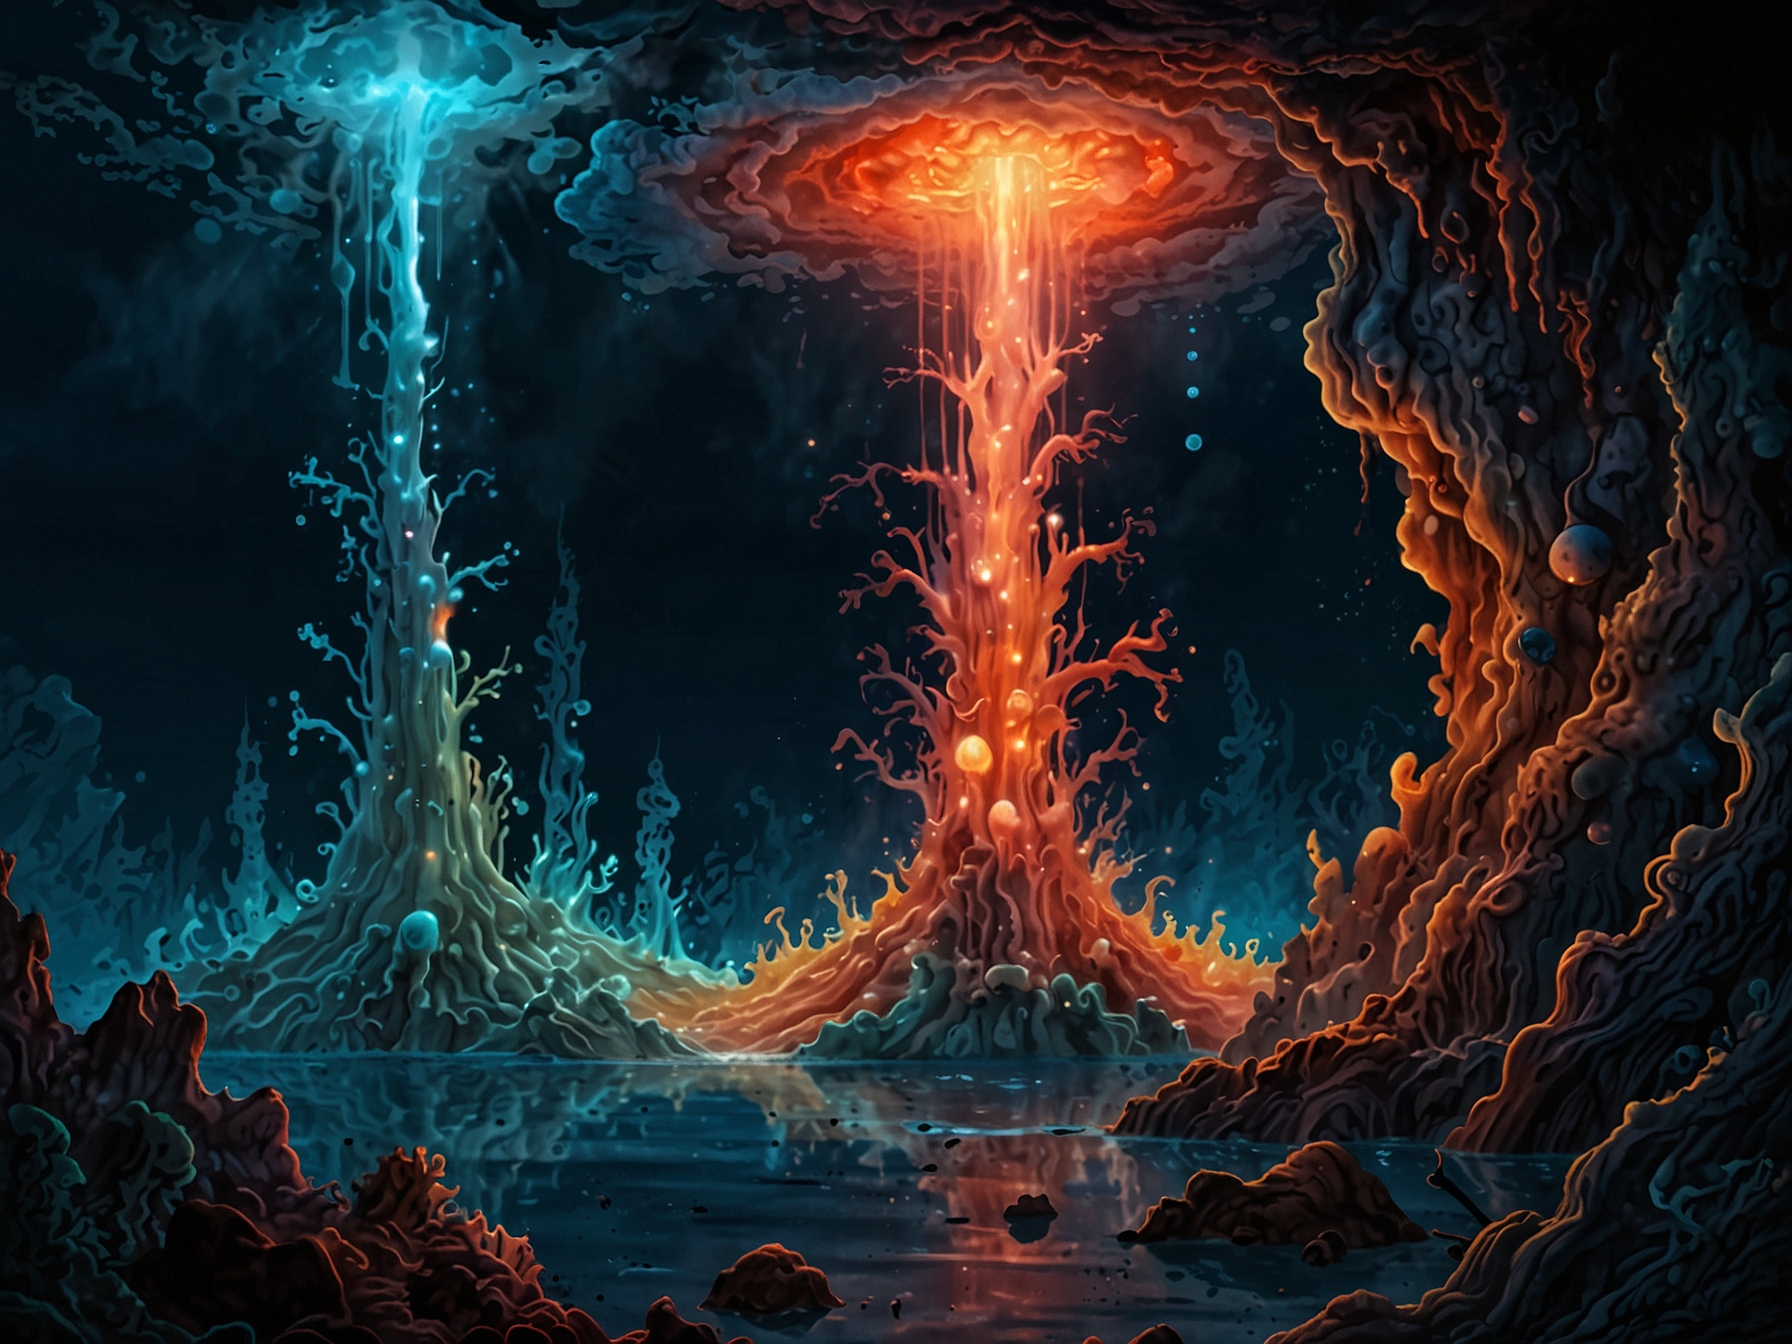 Illustration of hydrothermal vents on the ocean floor, teeming with ancient archaea. These microorganisms thrive in such extreme environments, harnessing energy from the abundant hydrogen gas released.